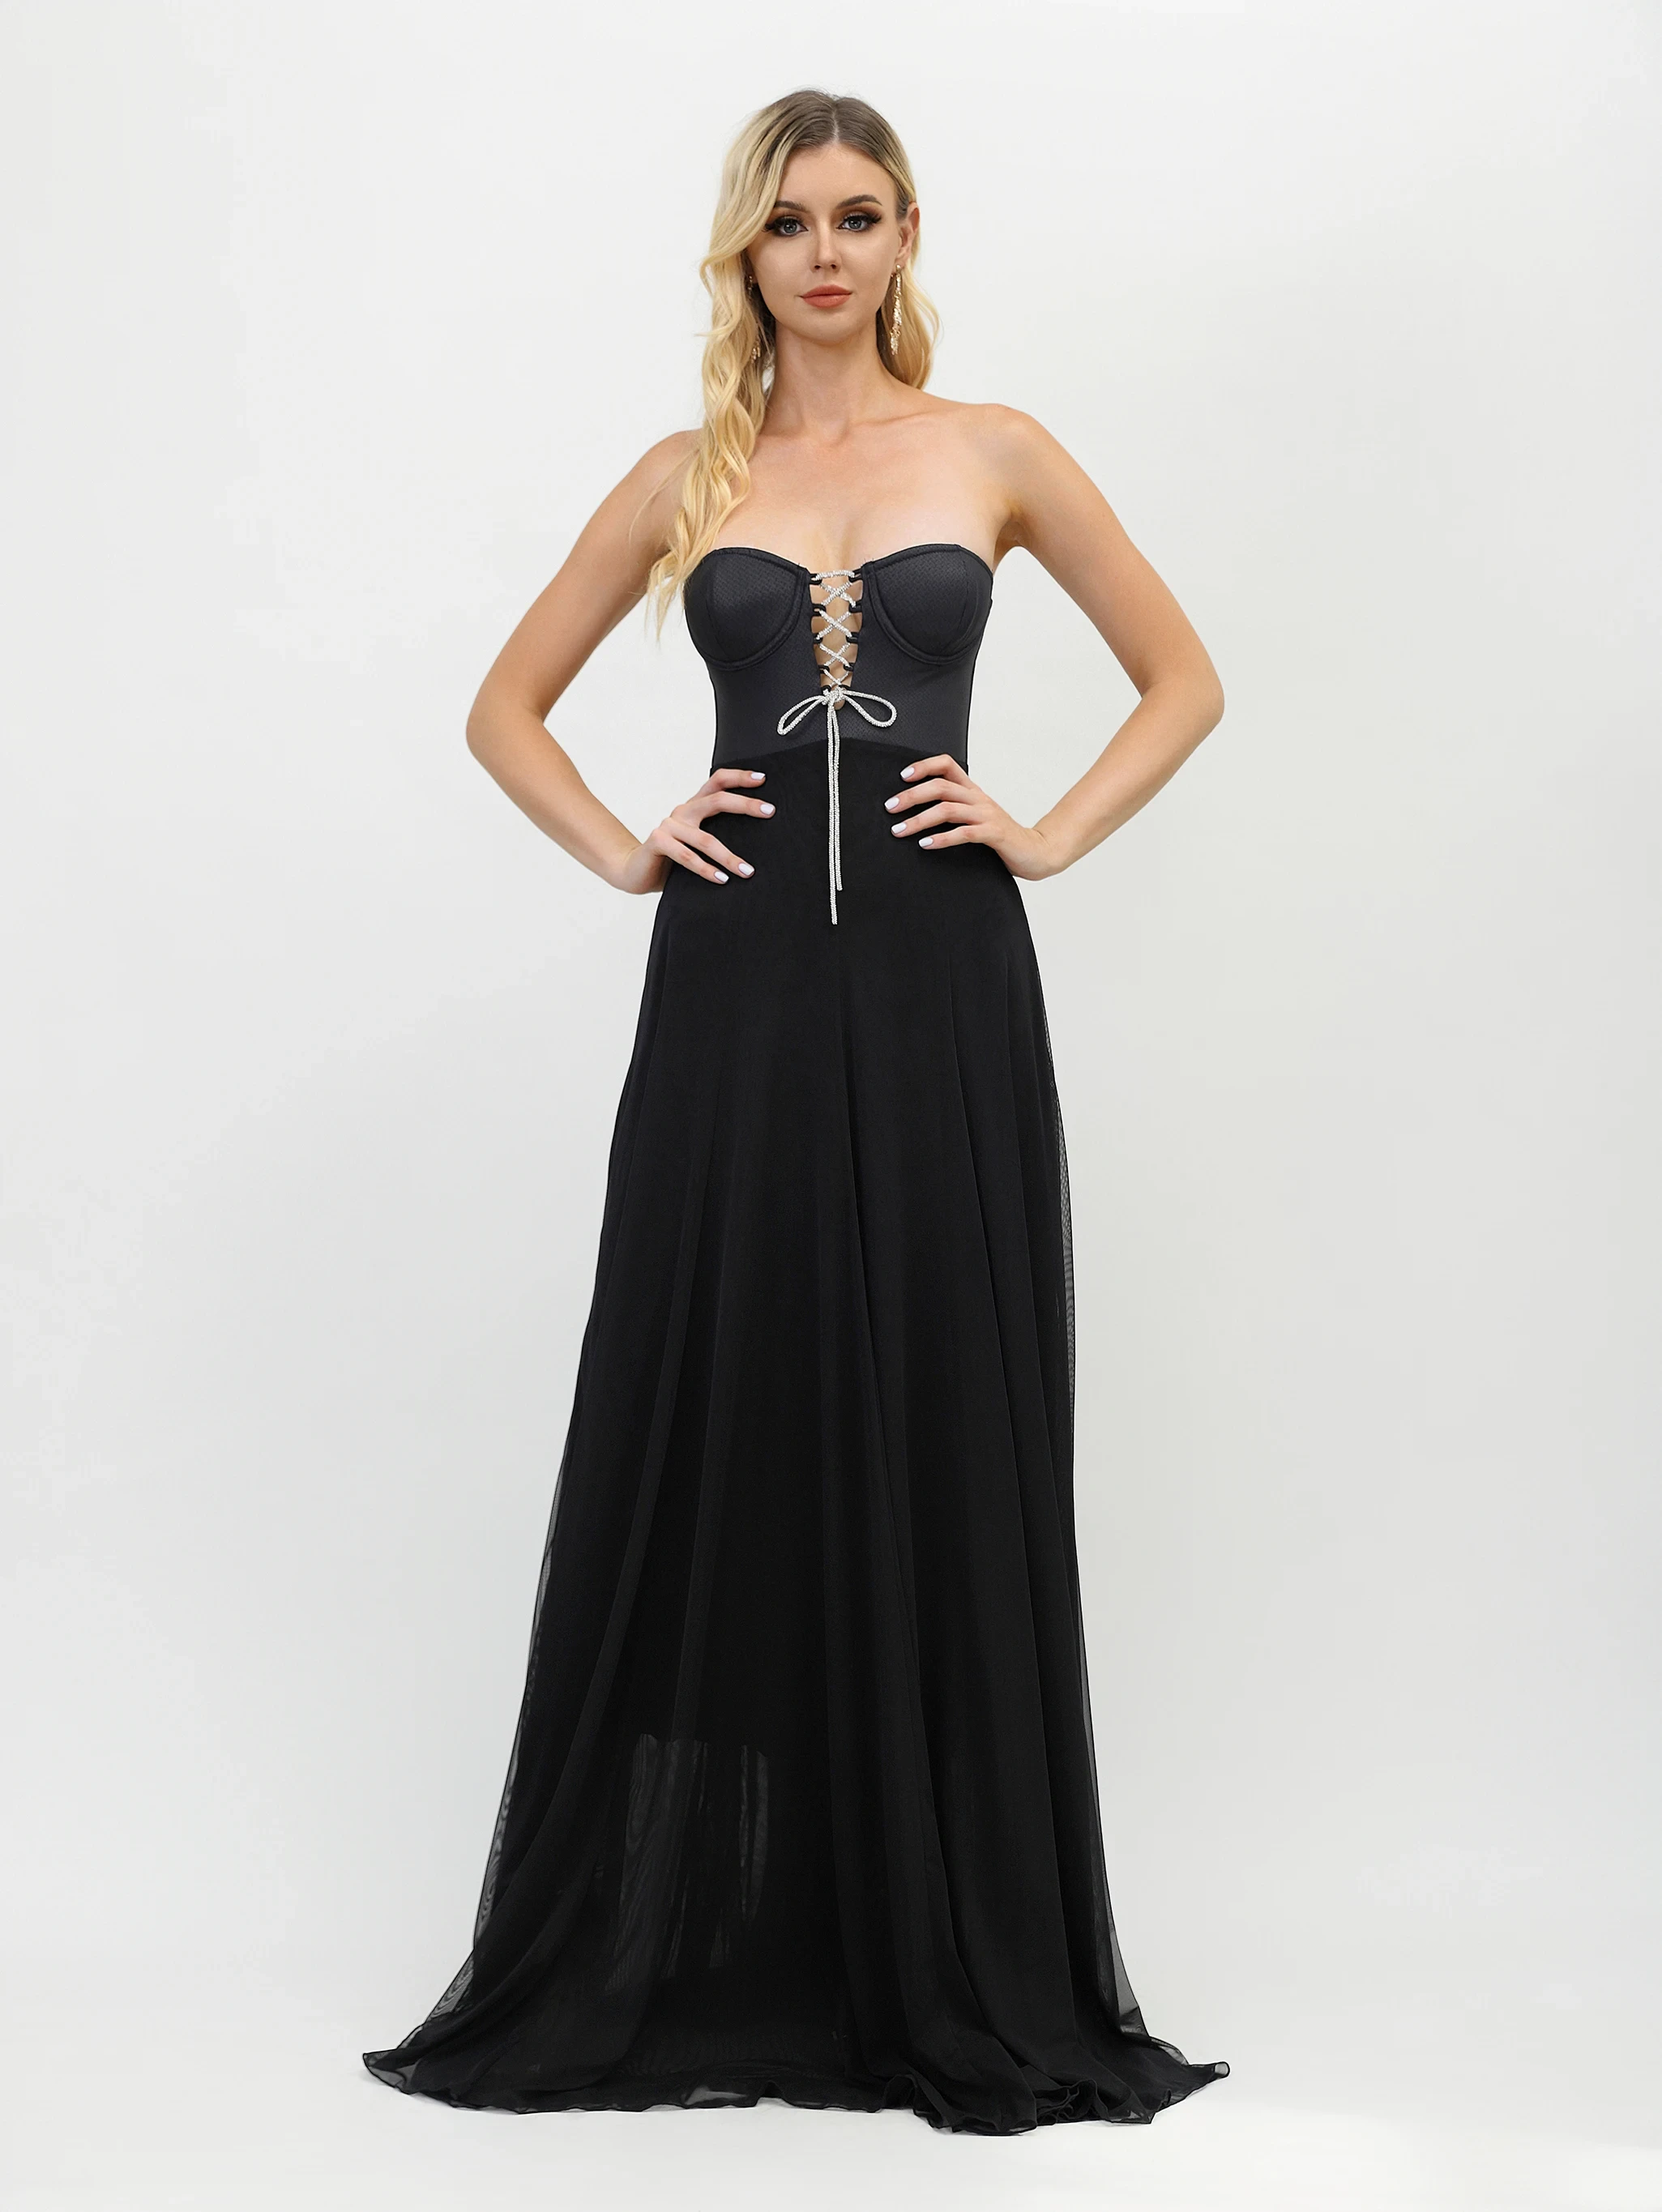 Evening Dresses: The Ultimate Statement of Elegance and Style